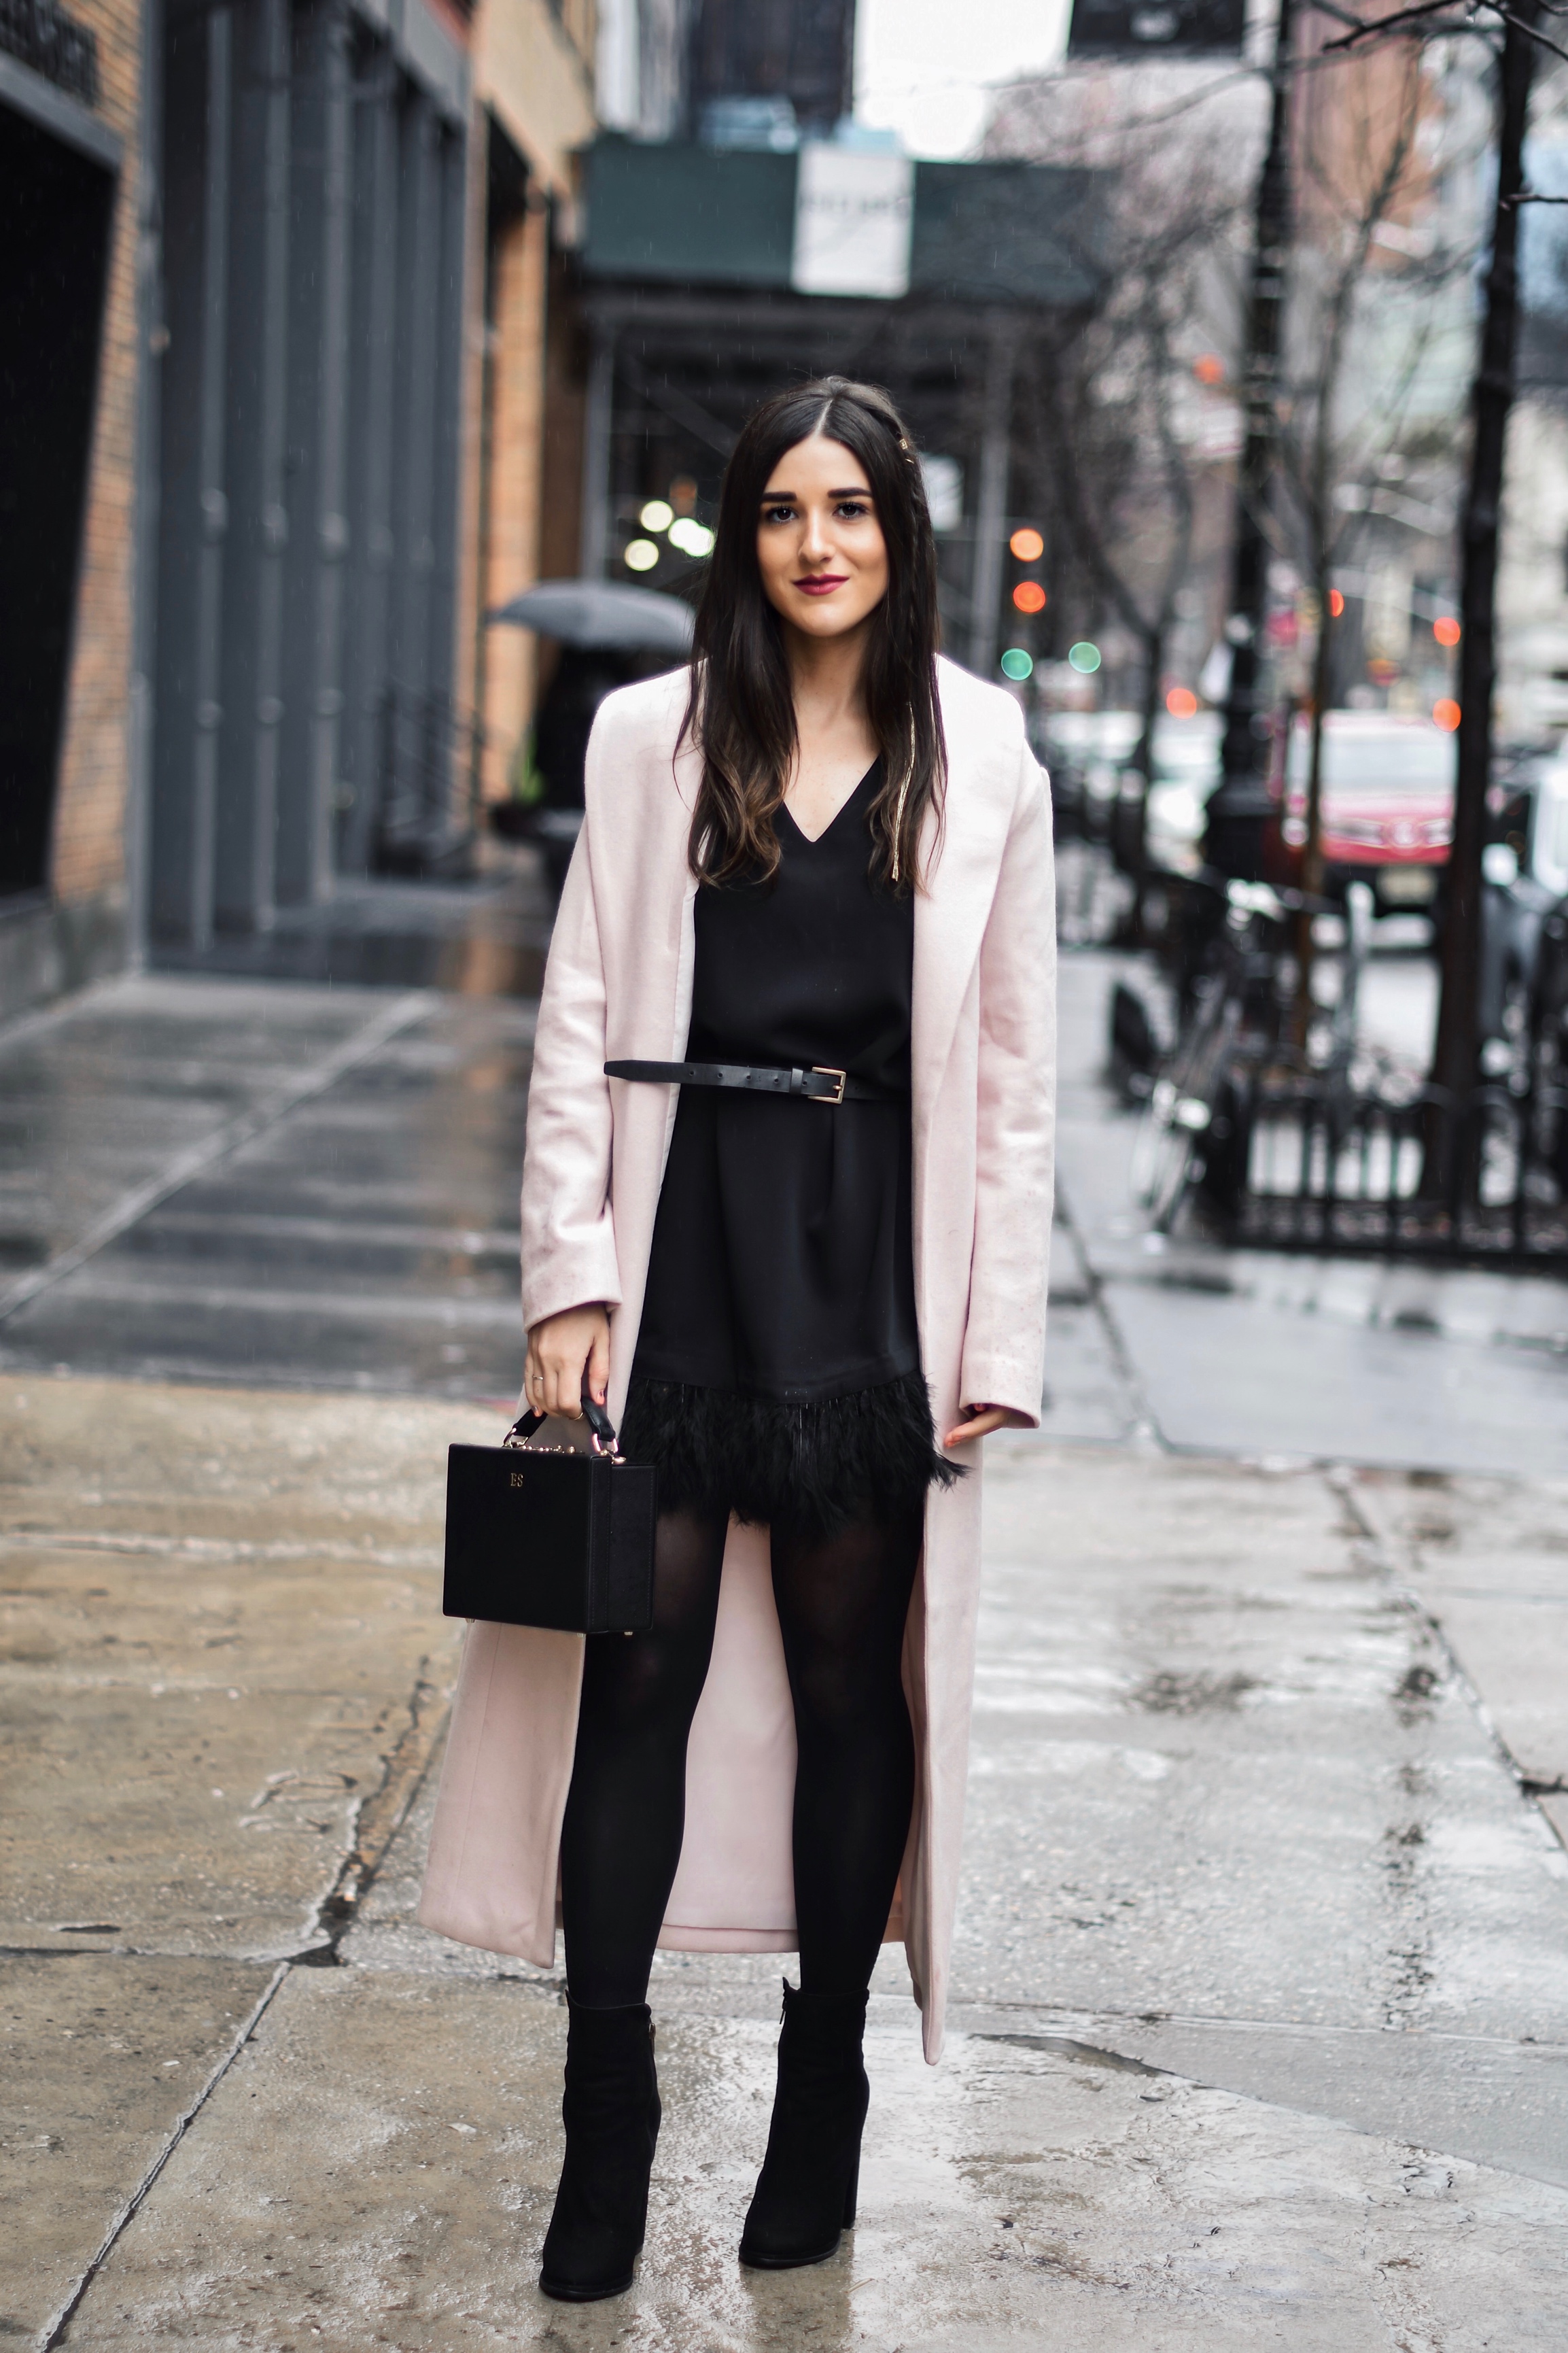 How To Stay Grounded Black Feather Trim Dress Long Pink Coat Esther Santer Fashion Blog NYC Street Style Blogger Outfit OOTD Trendy Saks Off 5th Feather Trim Dress Black Tights Booties M4D3 Shoes ASOS Belt Blush  Box Clutch Bag Shop Wear Cozy Winter.jpg